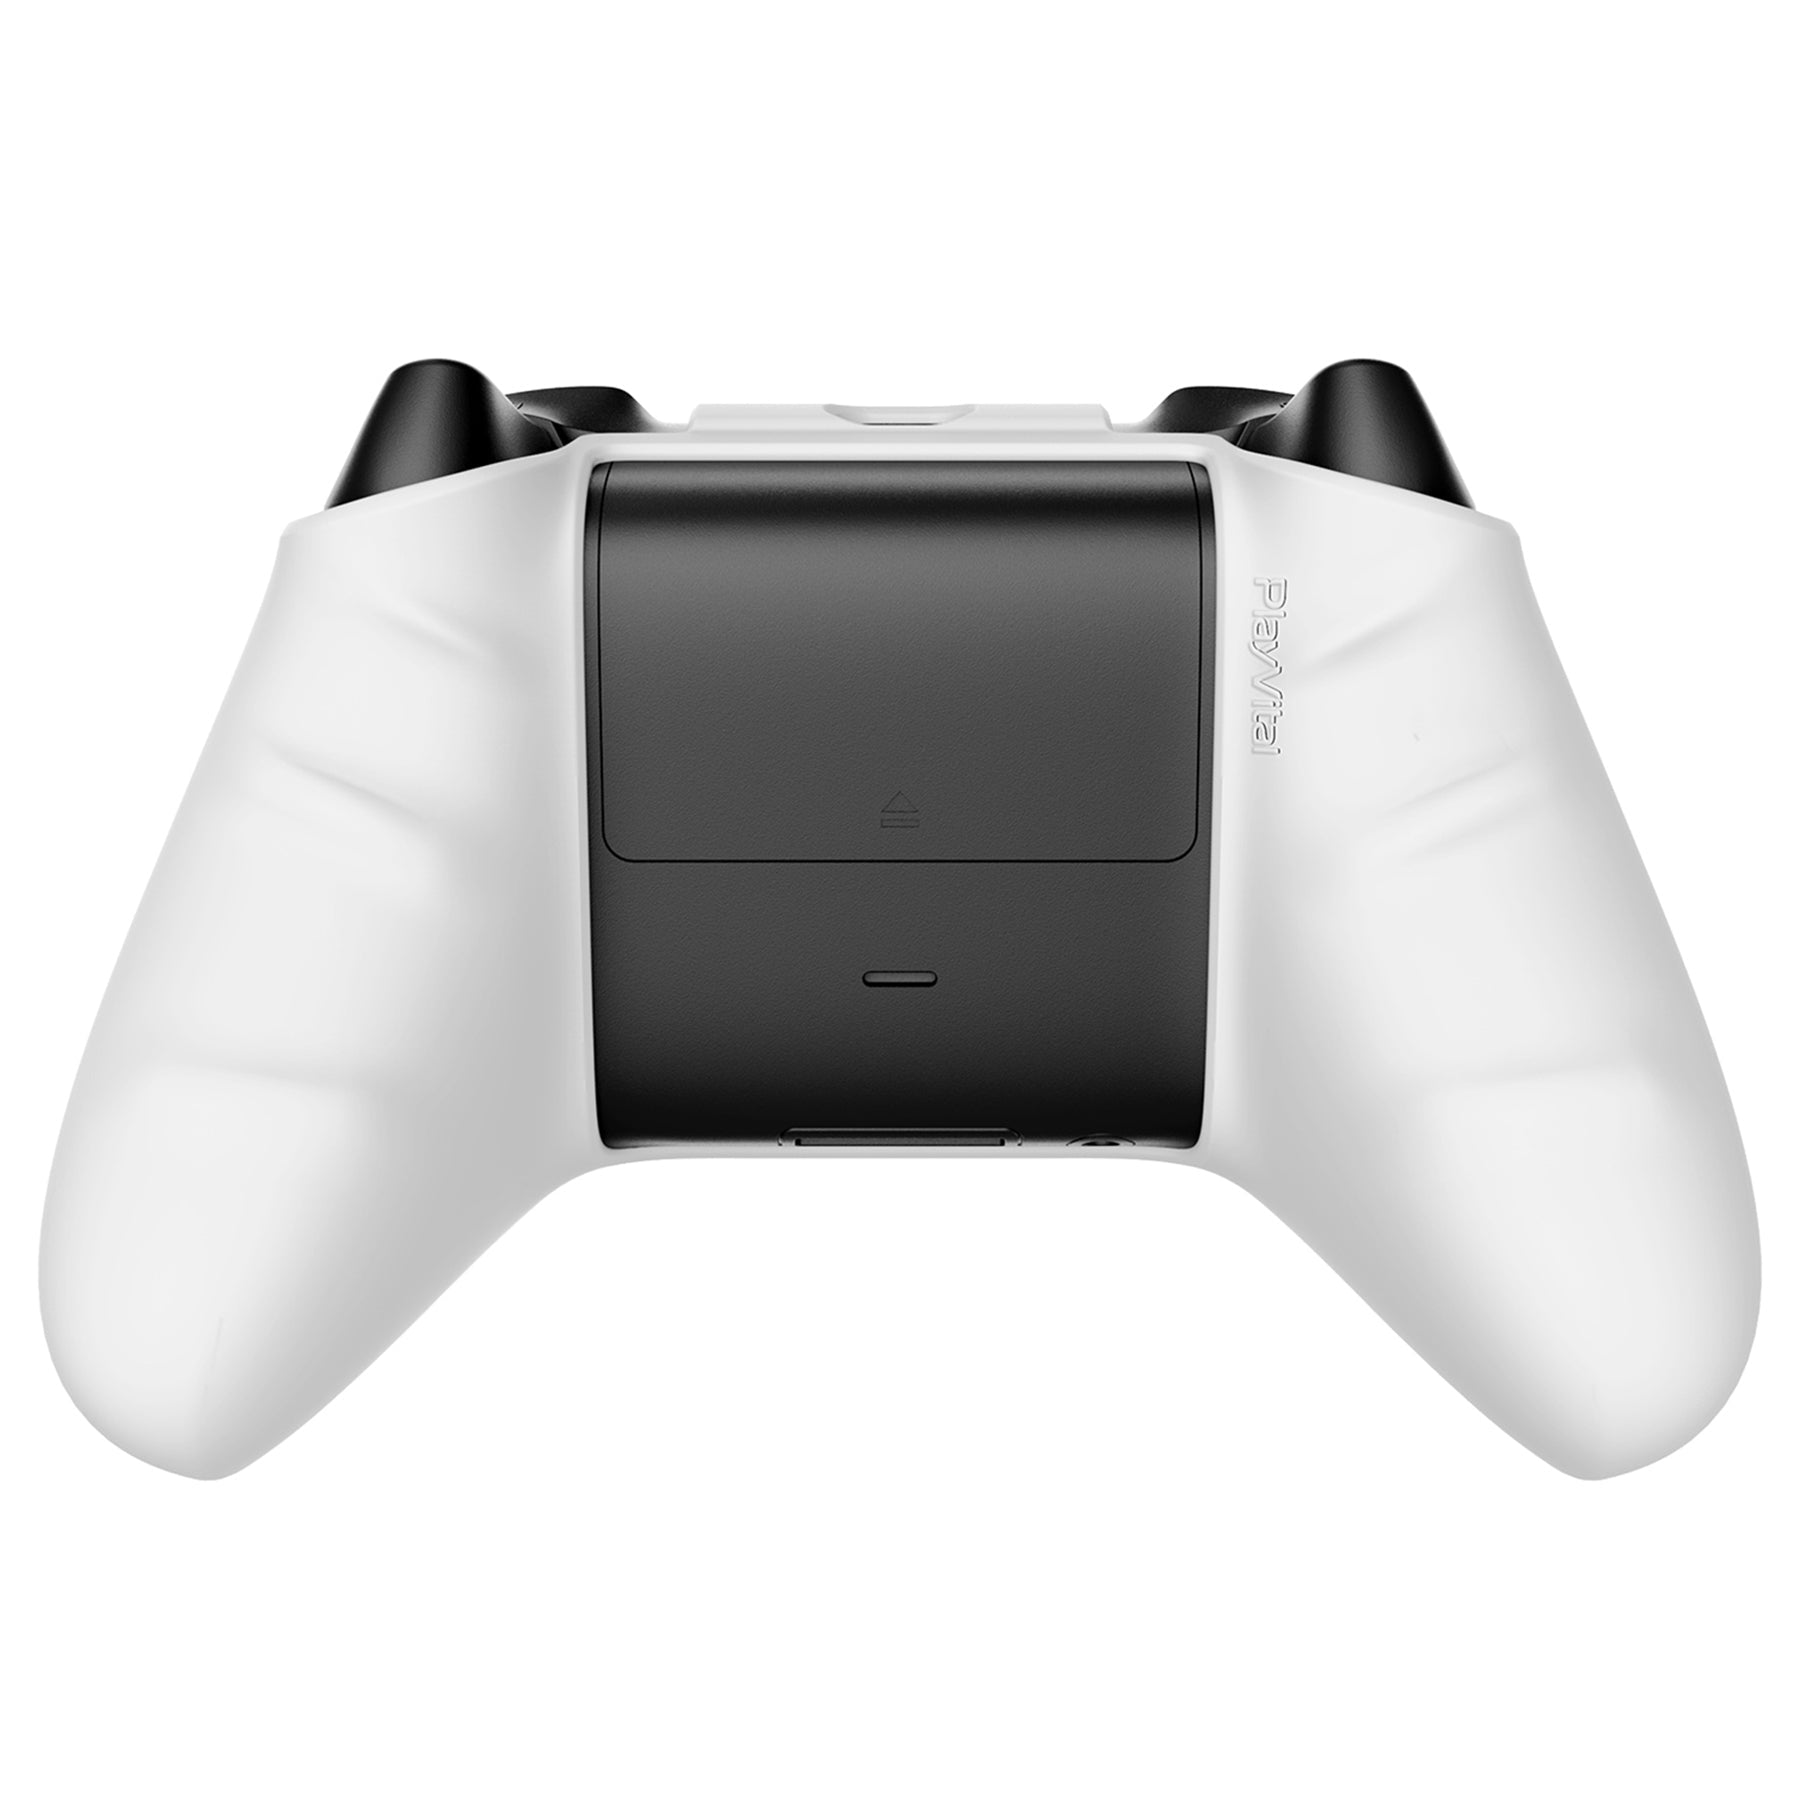 The PURE Grip Pad